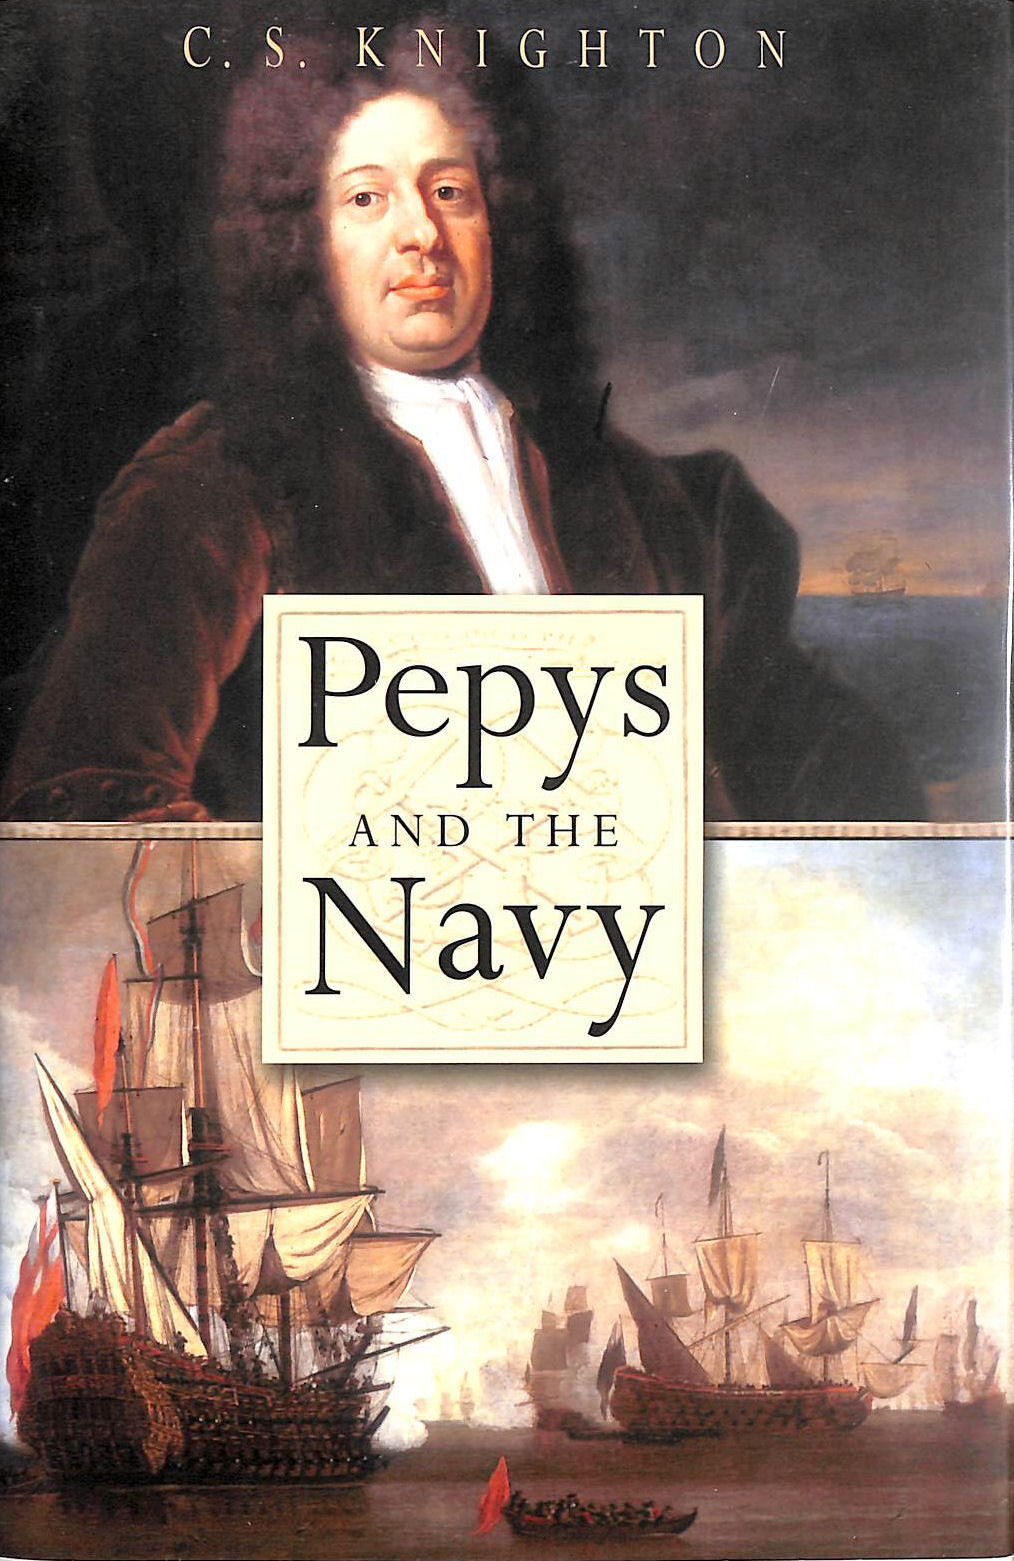 KNIGHTON, C S - Pepys And The Navy